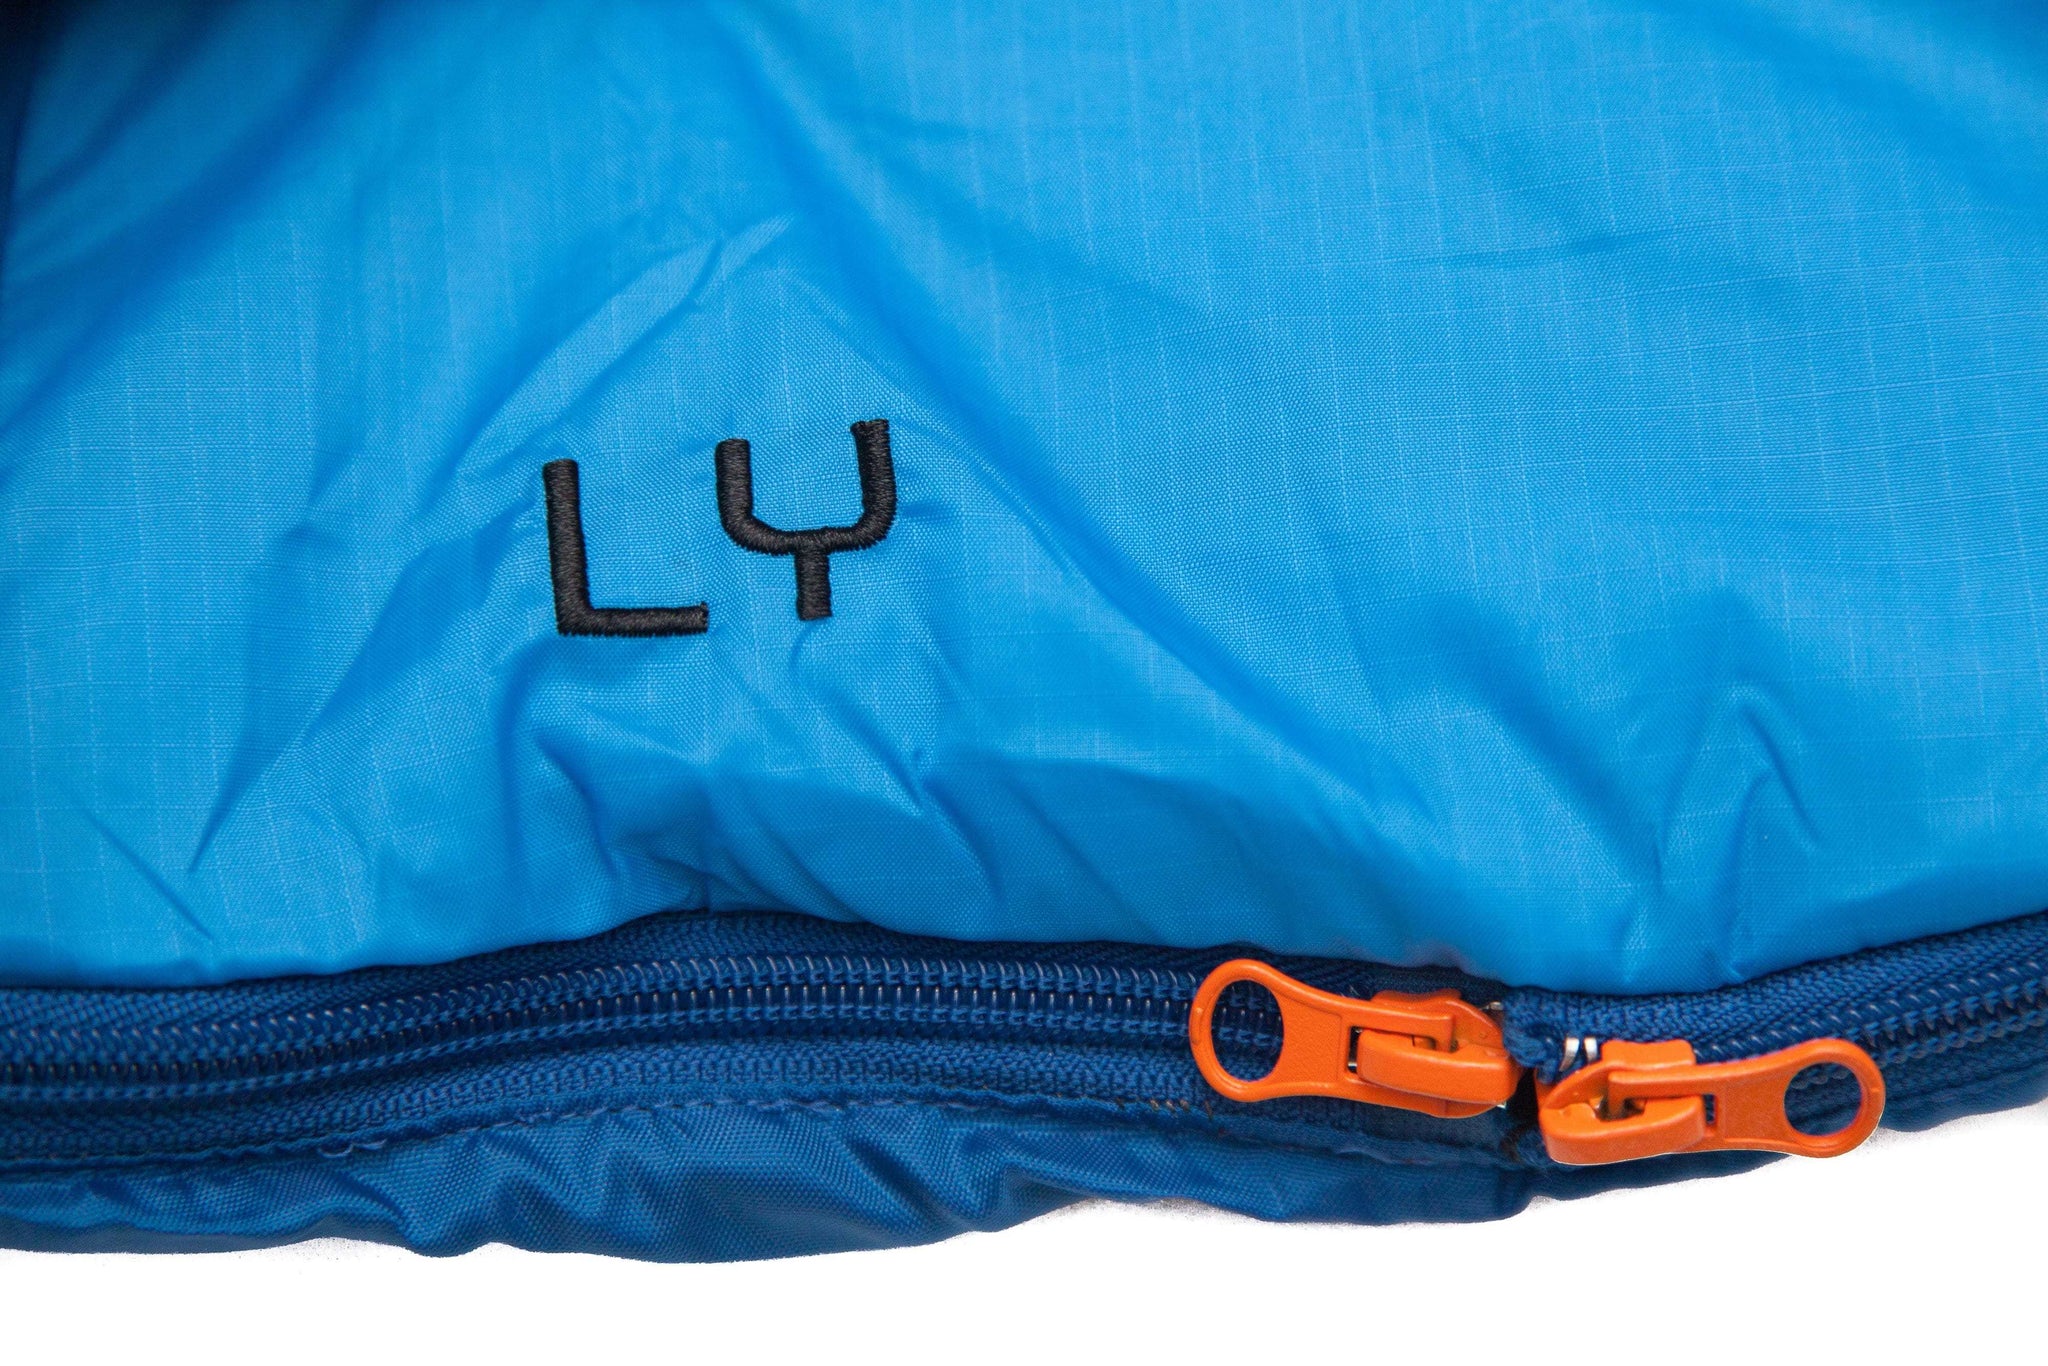 The two part zipped arrangement of the Ly Sleeping Bag.